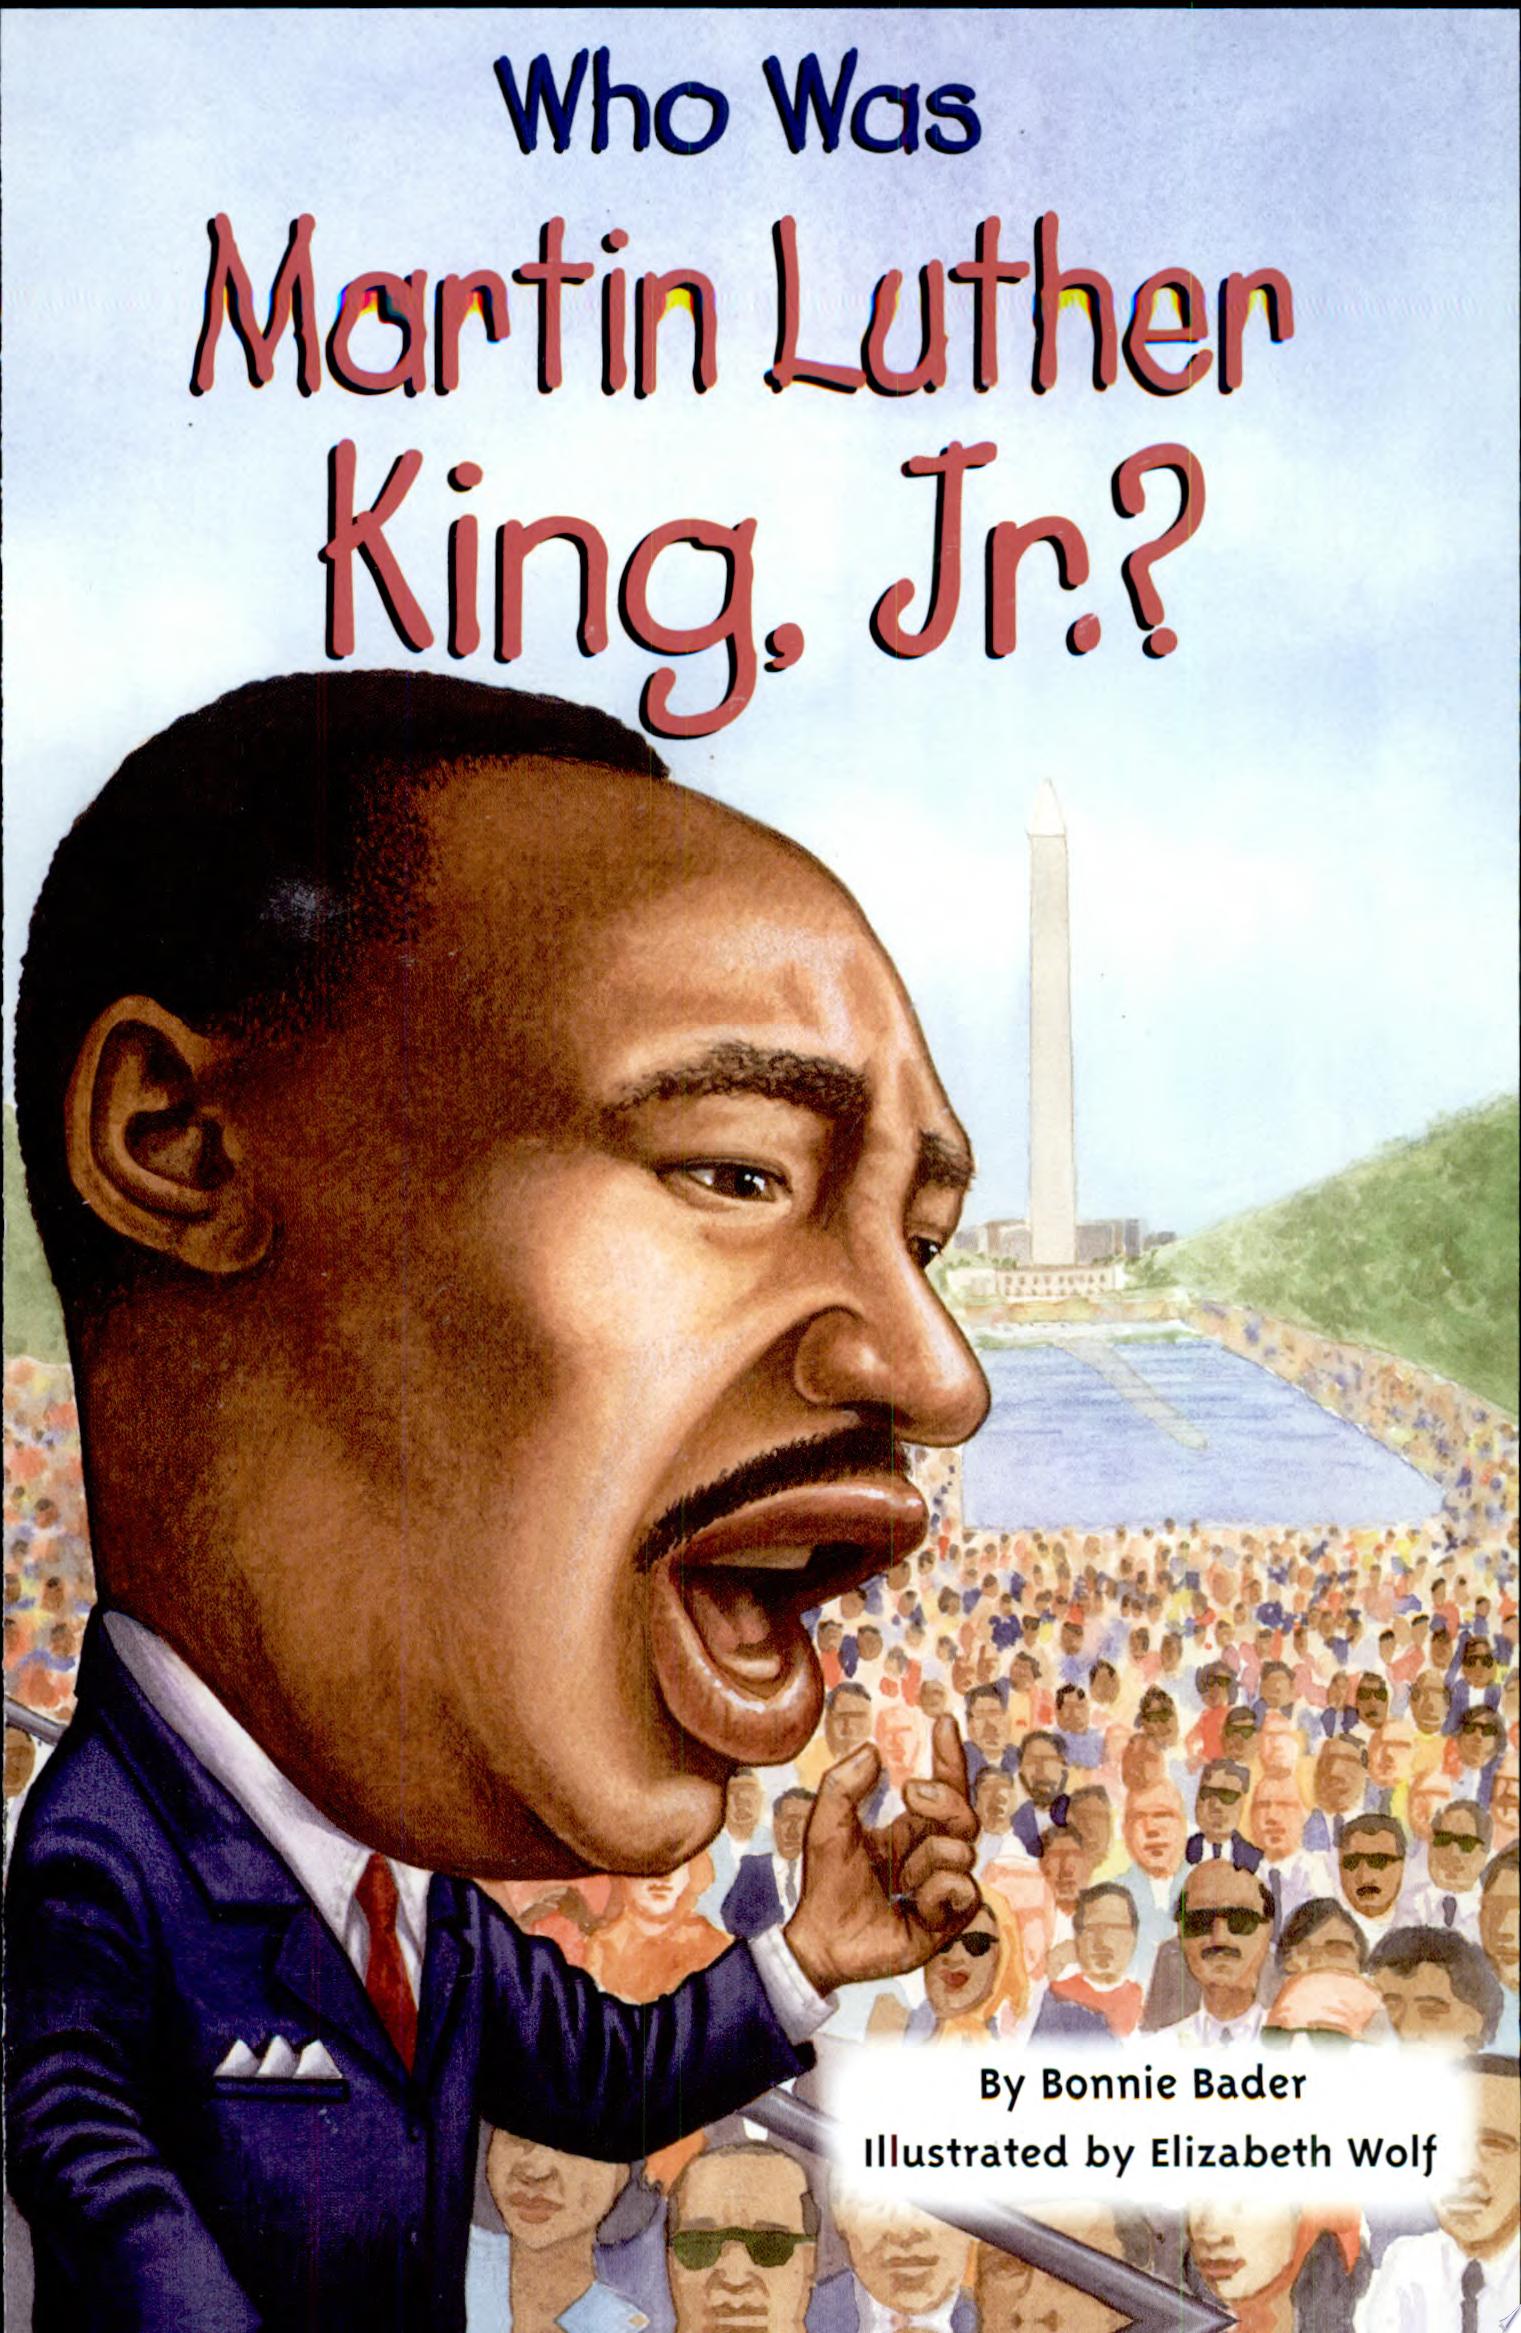 Image for "Who was Martin Luther King, Jr.?"